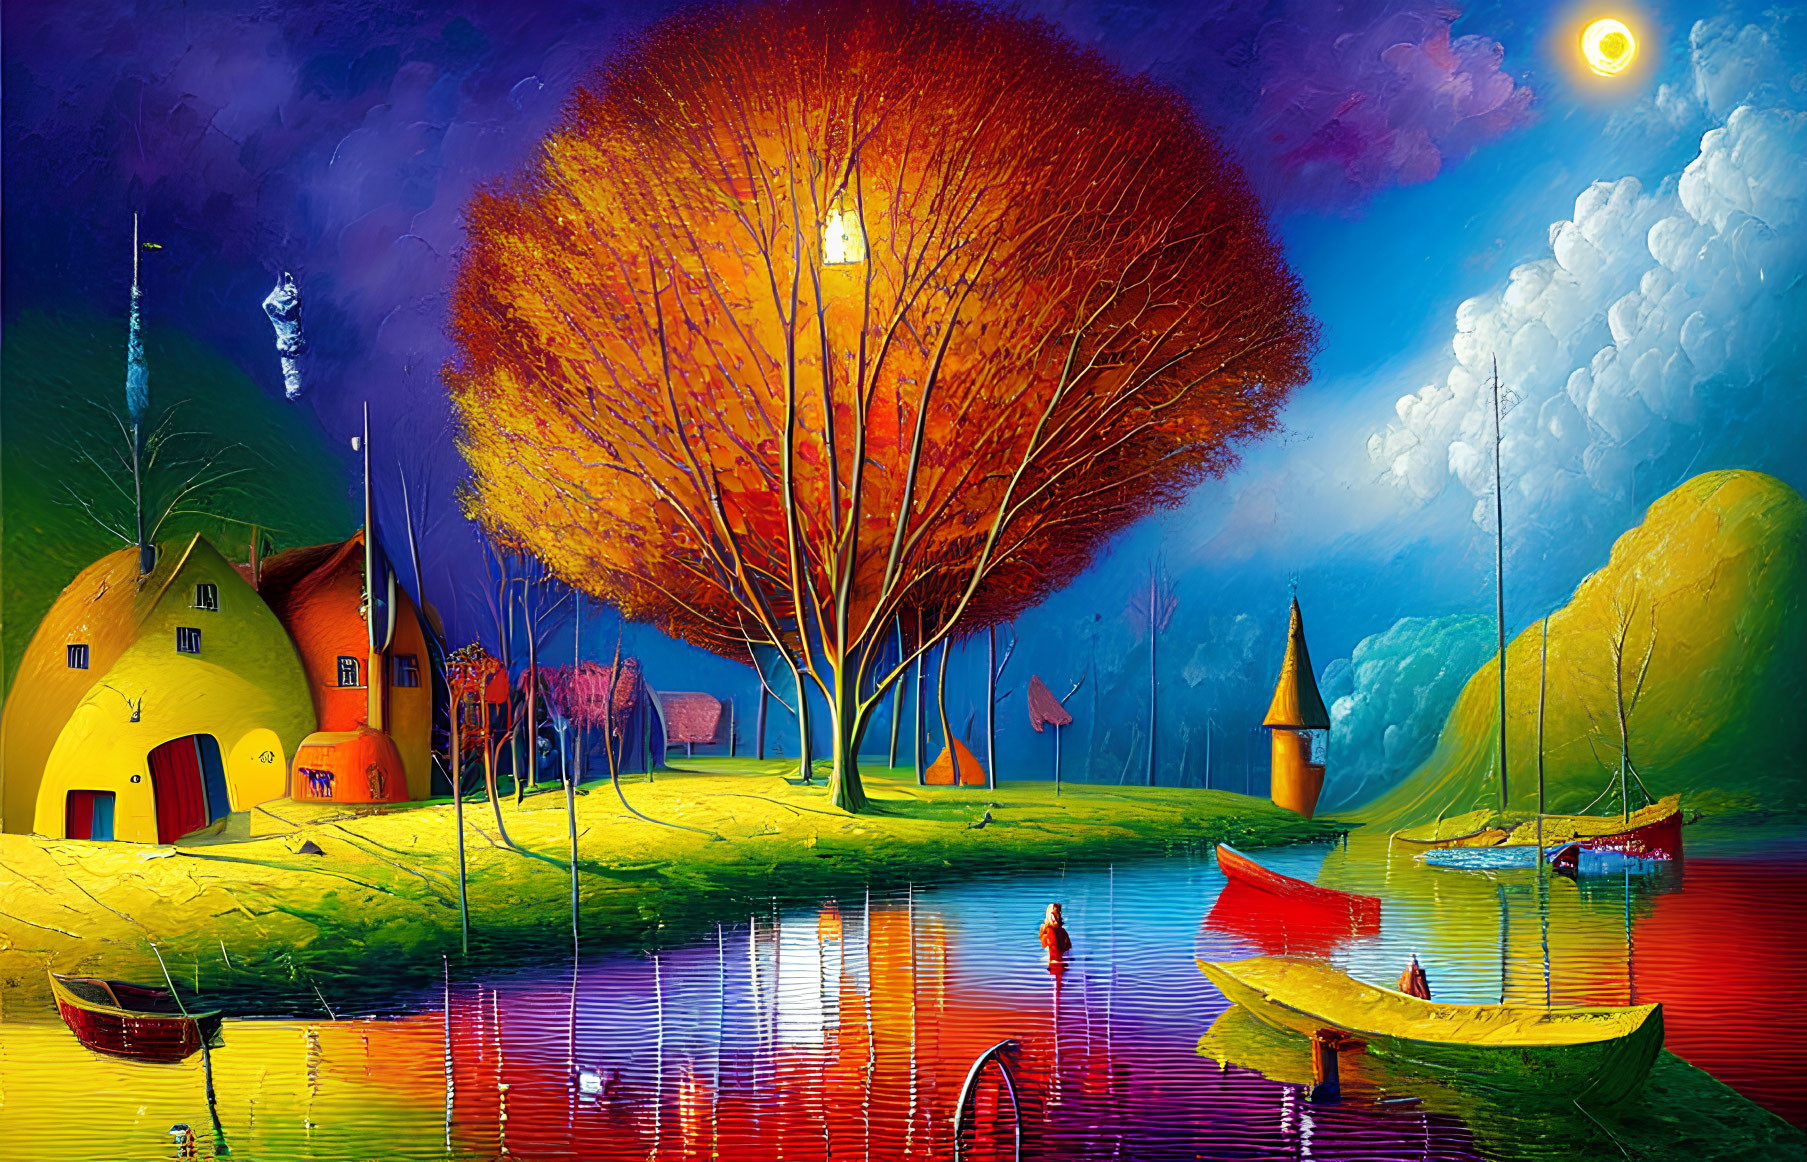 Colorful village painting with autumn trees, yellow moon, and starry sky.